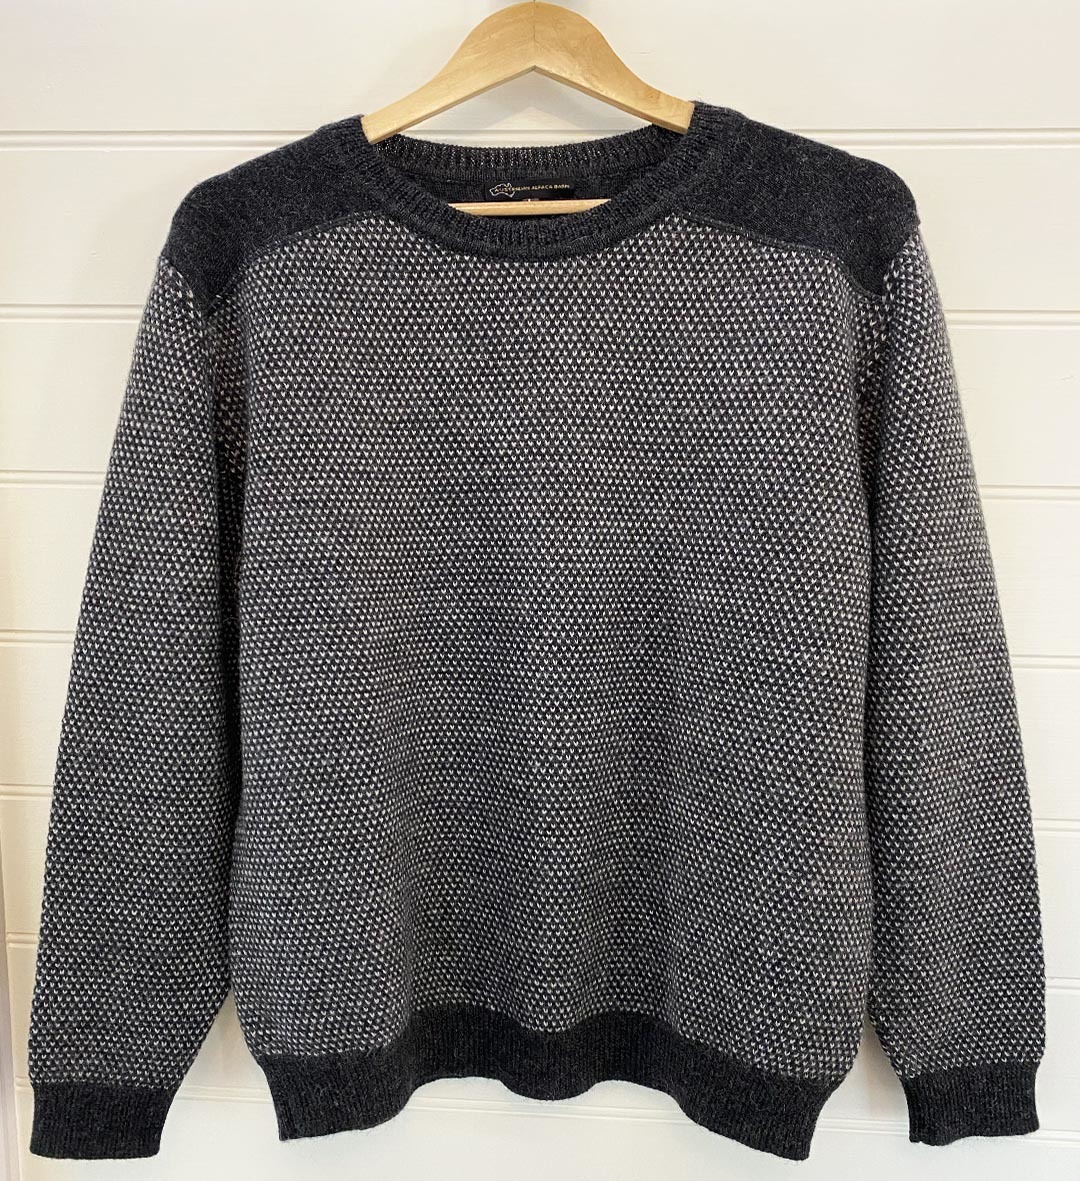 Pique Sweater - Charcoal/Sliver - 1